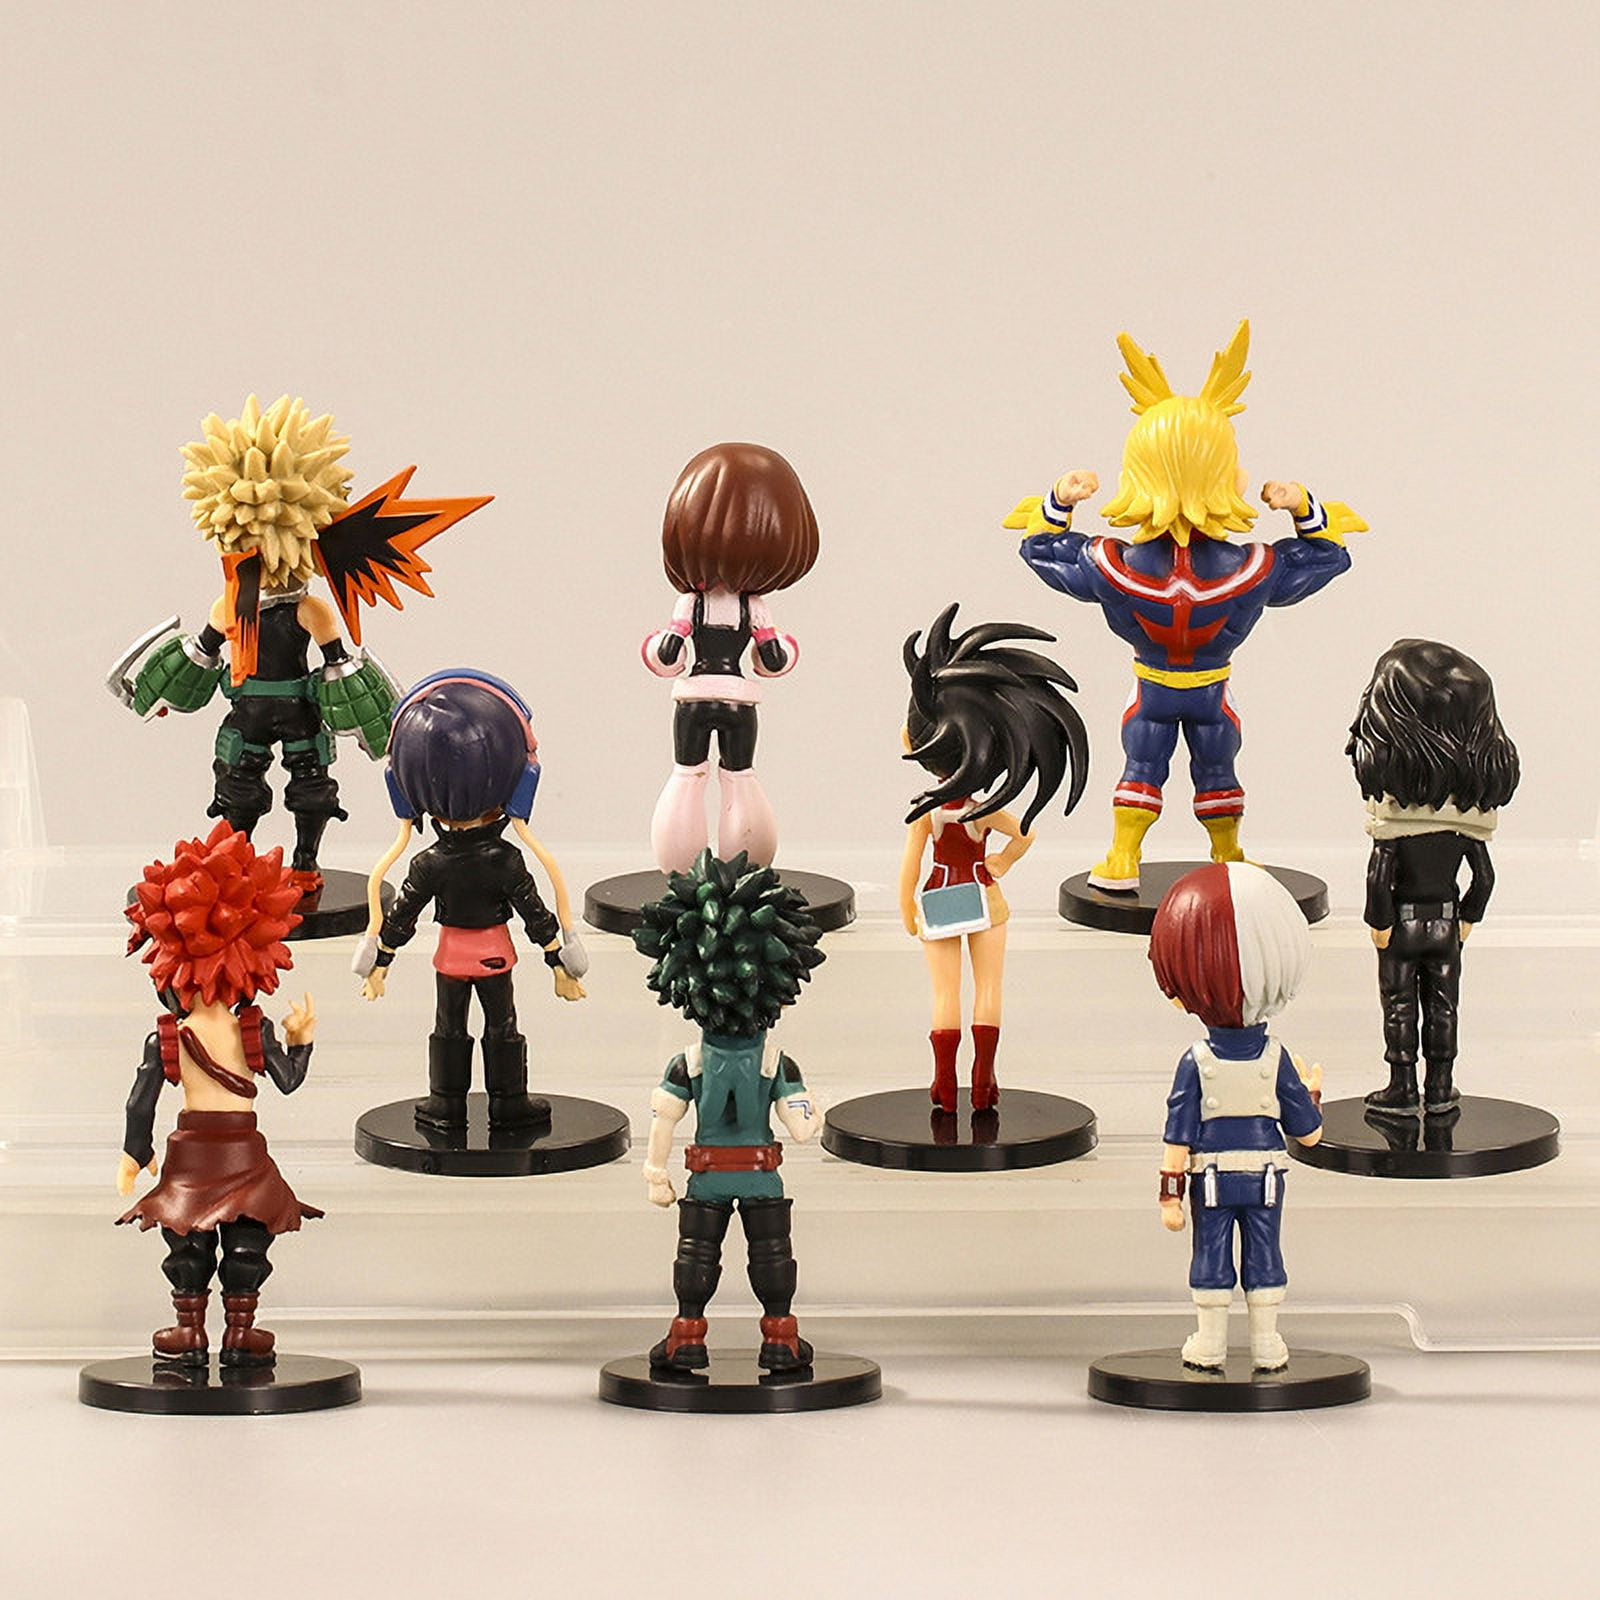 Buy Trunkin | Demon Slayer Chibi Small Action Figure Set of 5 | Model C -  Kimetsu no Yaiba Anime Figurines | PVC Multicolour Doll Toys Fan Collection  Gifts for Anime Fans |